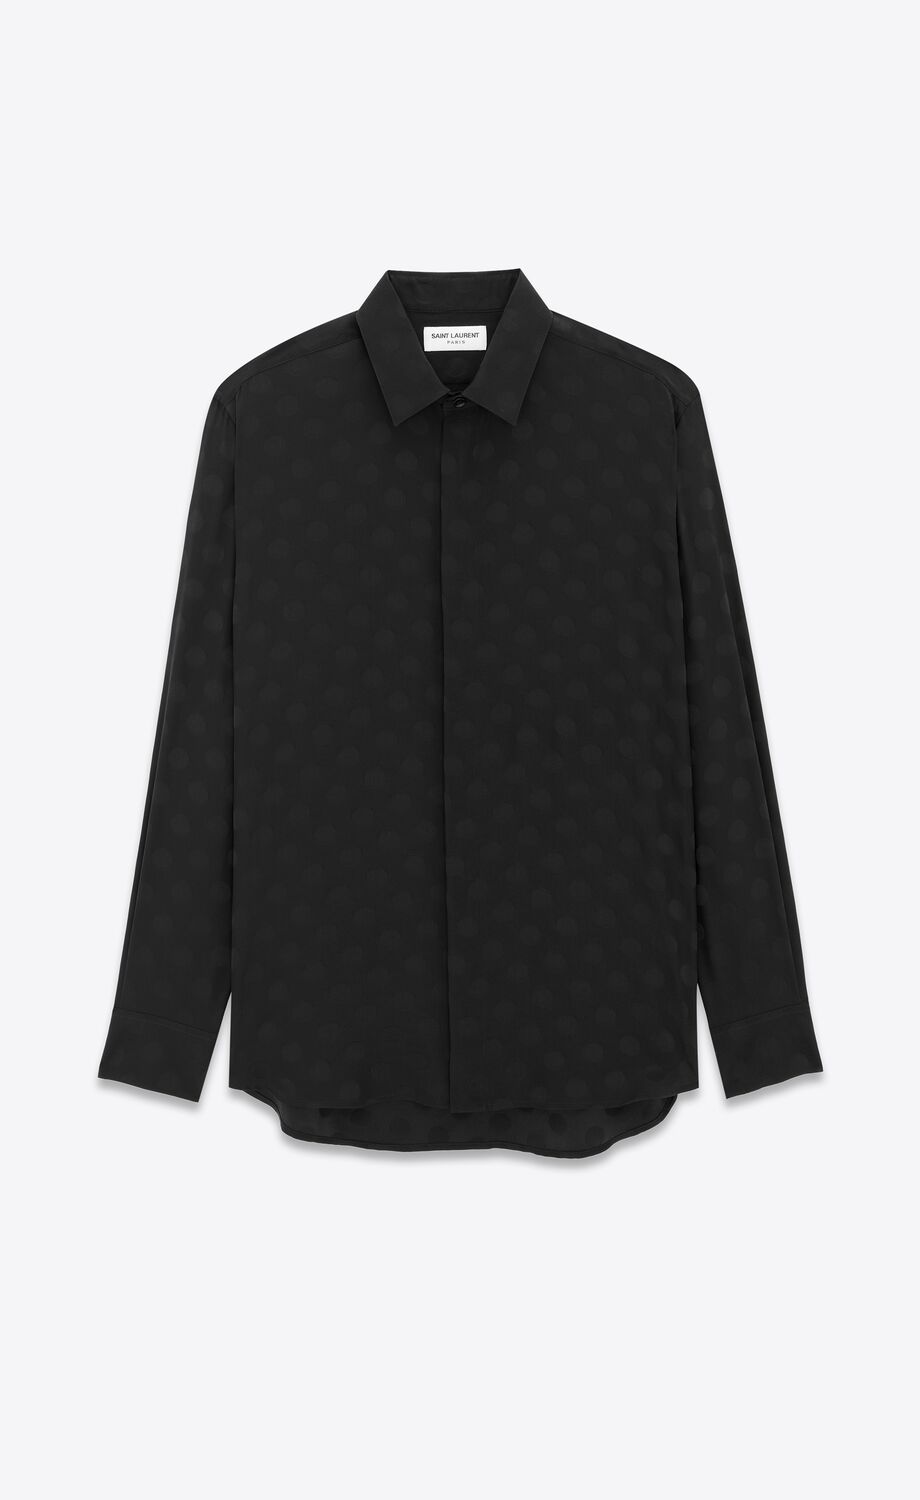 SHIRT IN DOTTED SHINY AND MATTE SILK | Saint Laurent | YSL.com